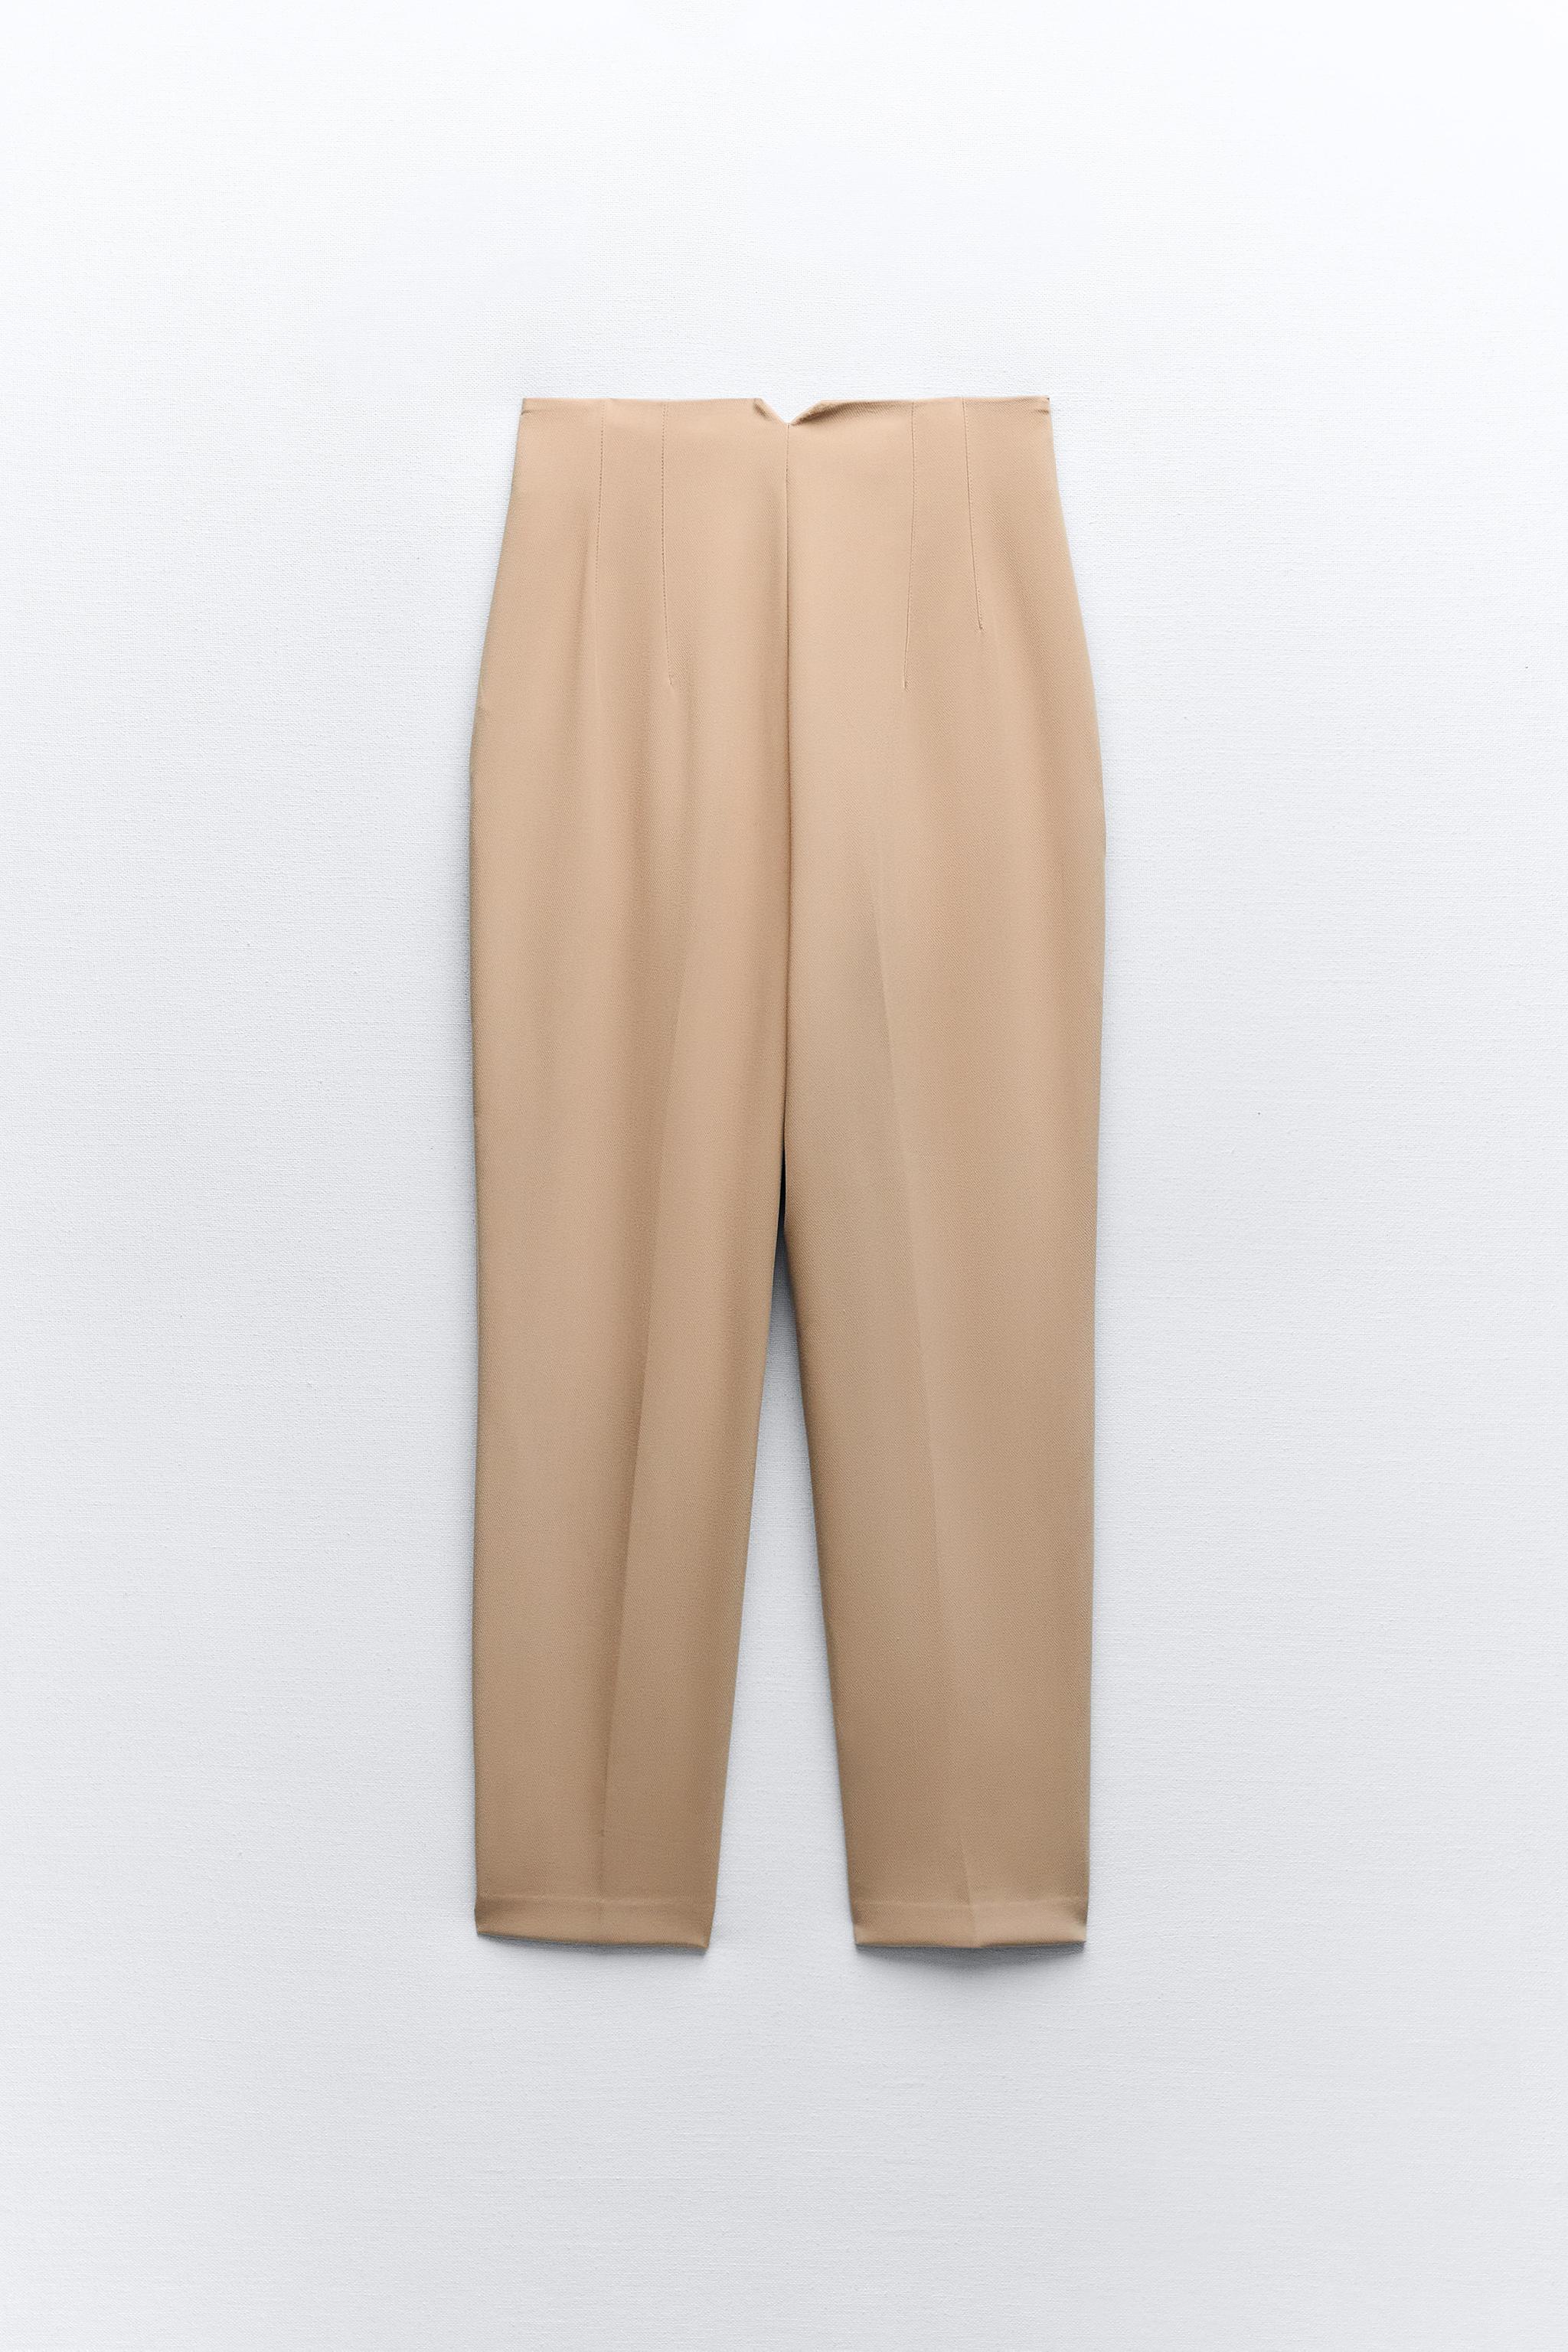 SIZE M ZARA HIGH WAISTED FABRIC-COVERED BELTED TROUSERS PANTS ECRU size S  EUR 46,86 - PicClick IT